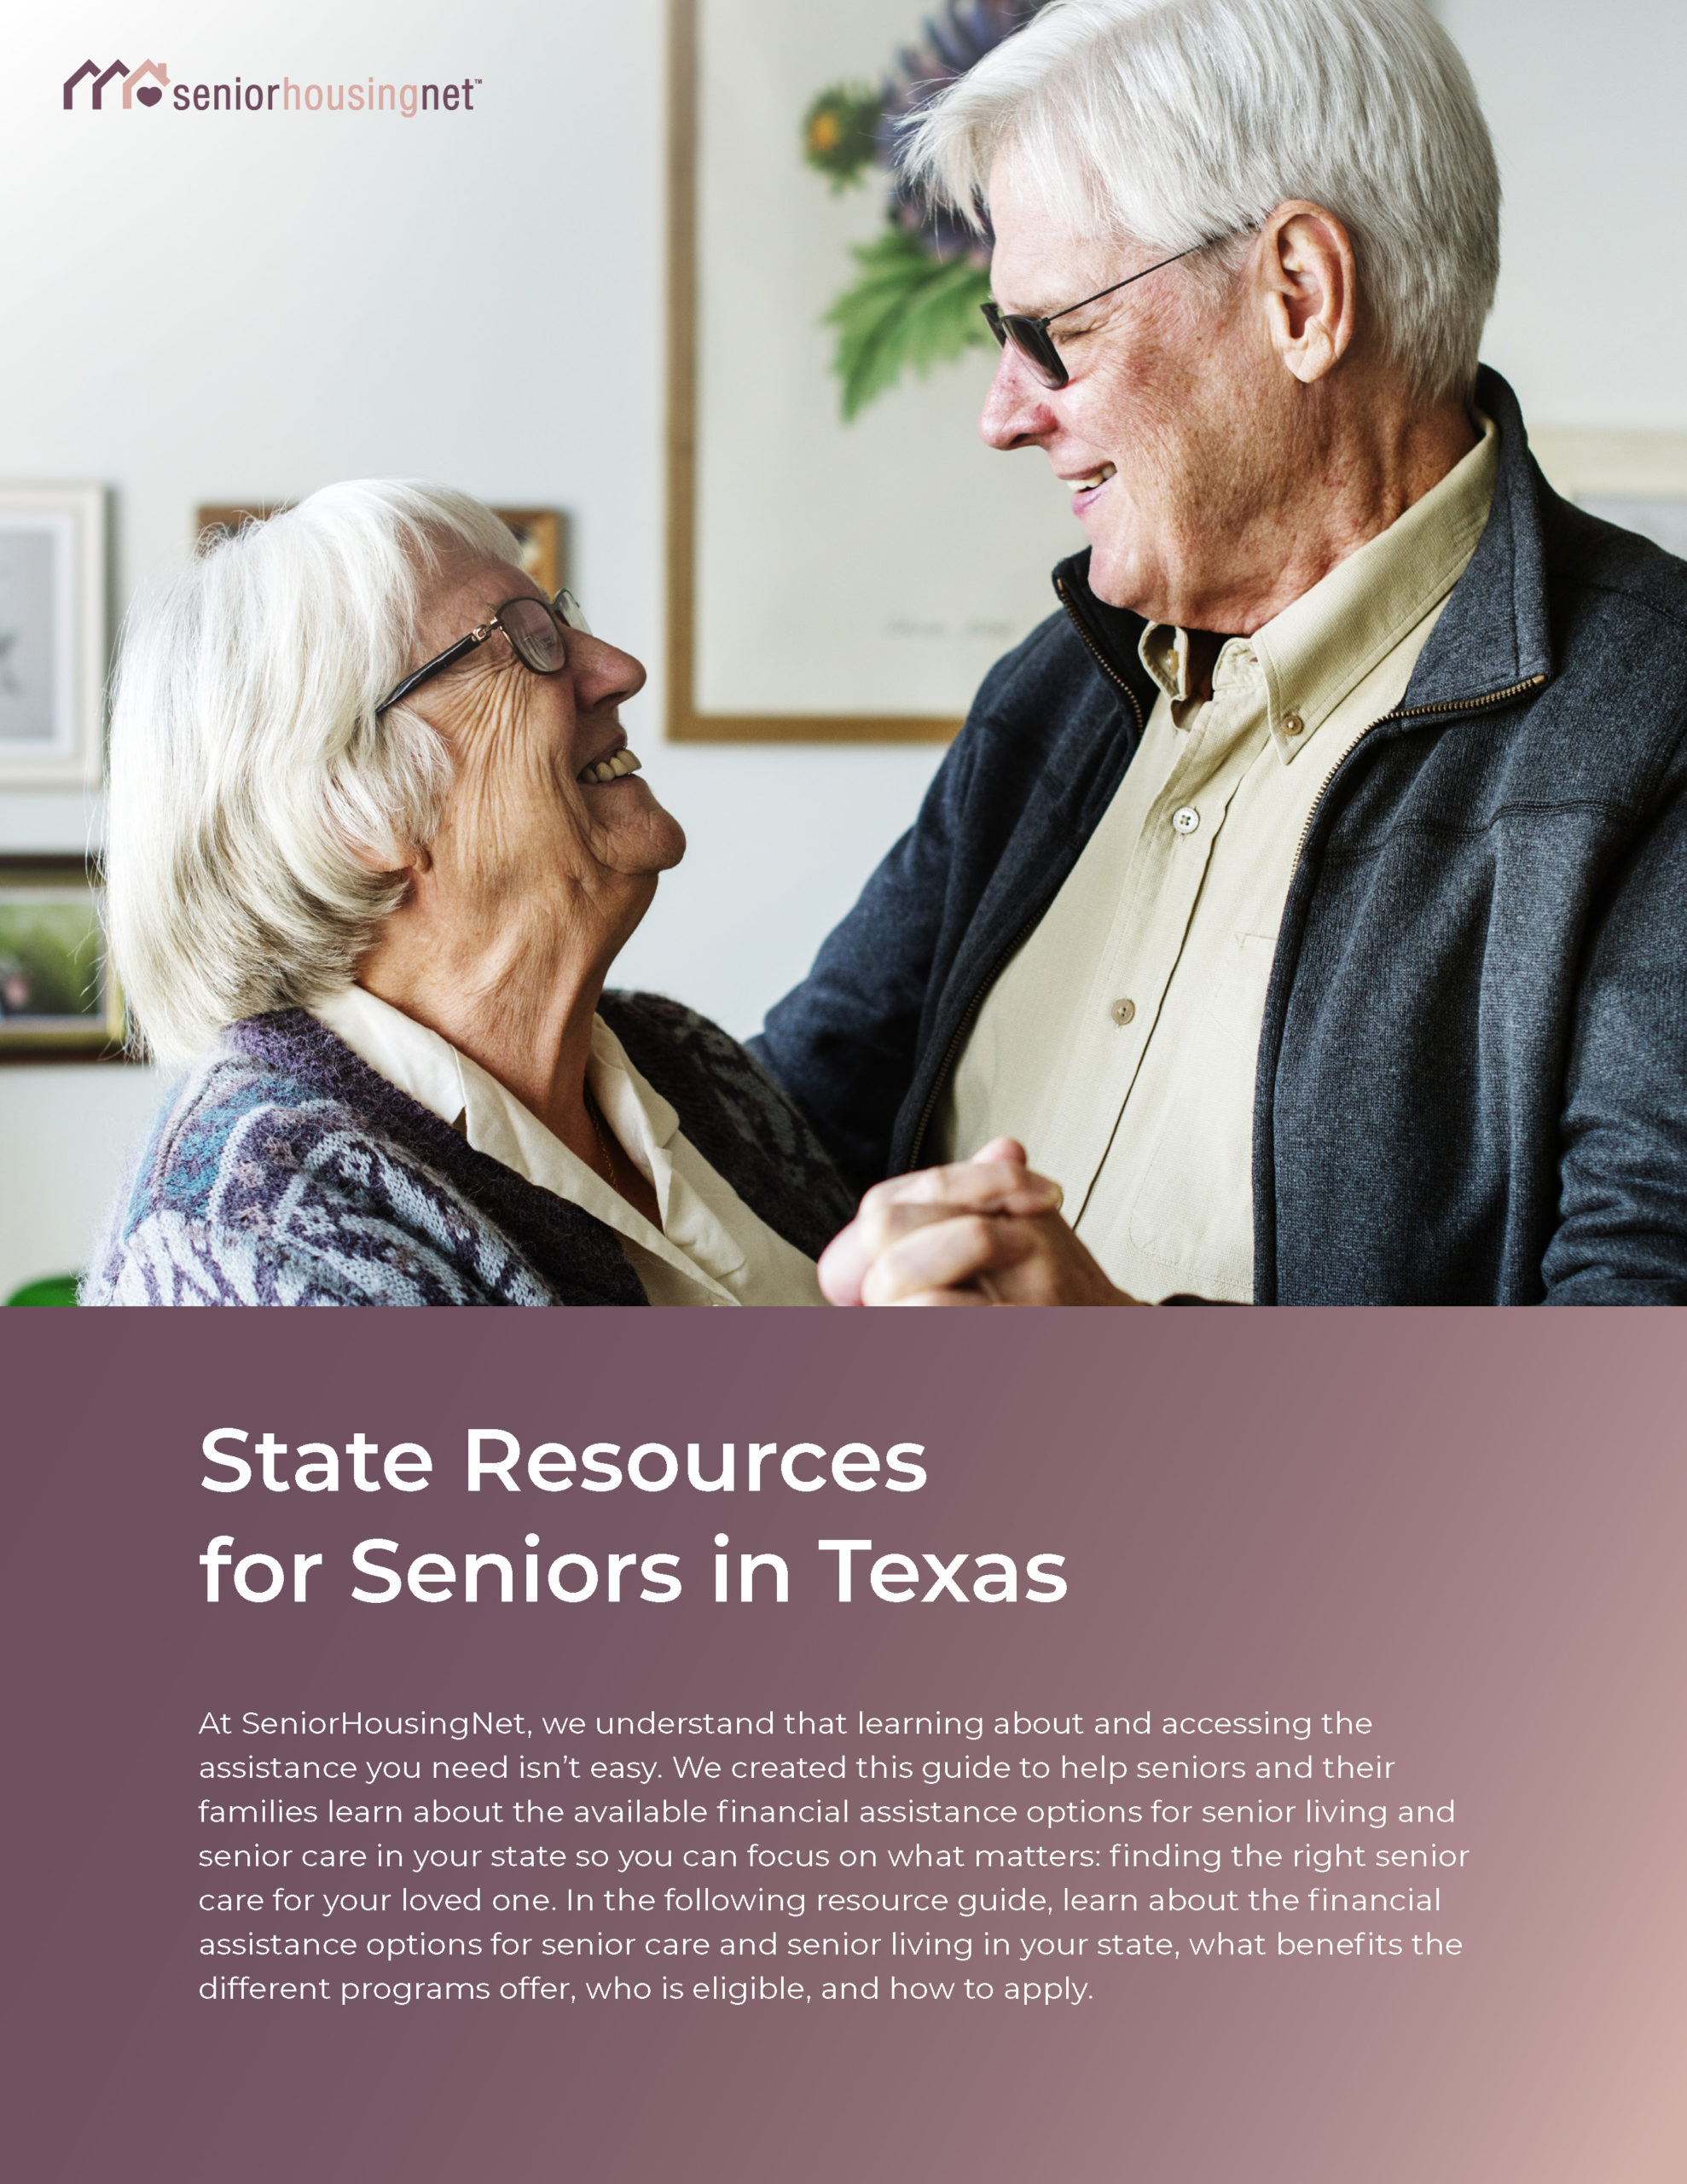 State Resources for Seniors in Texas